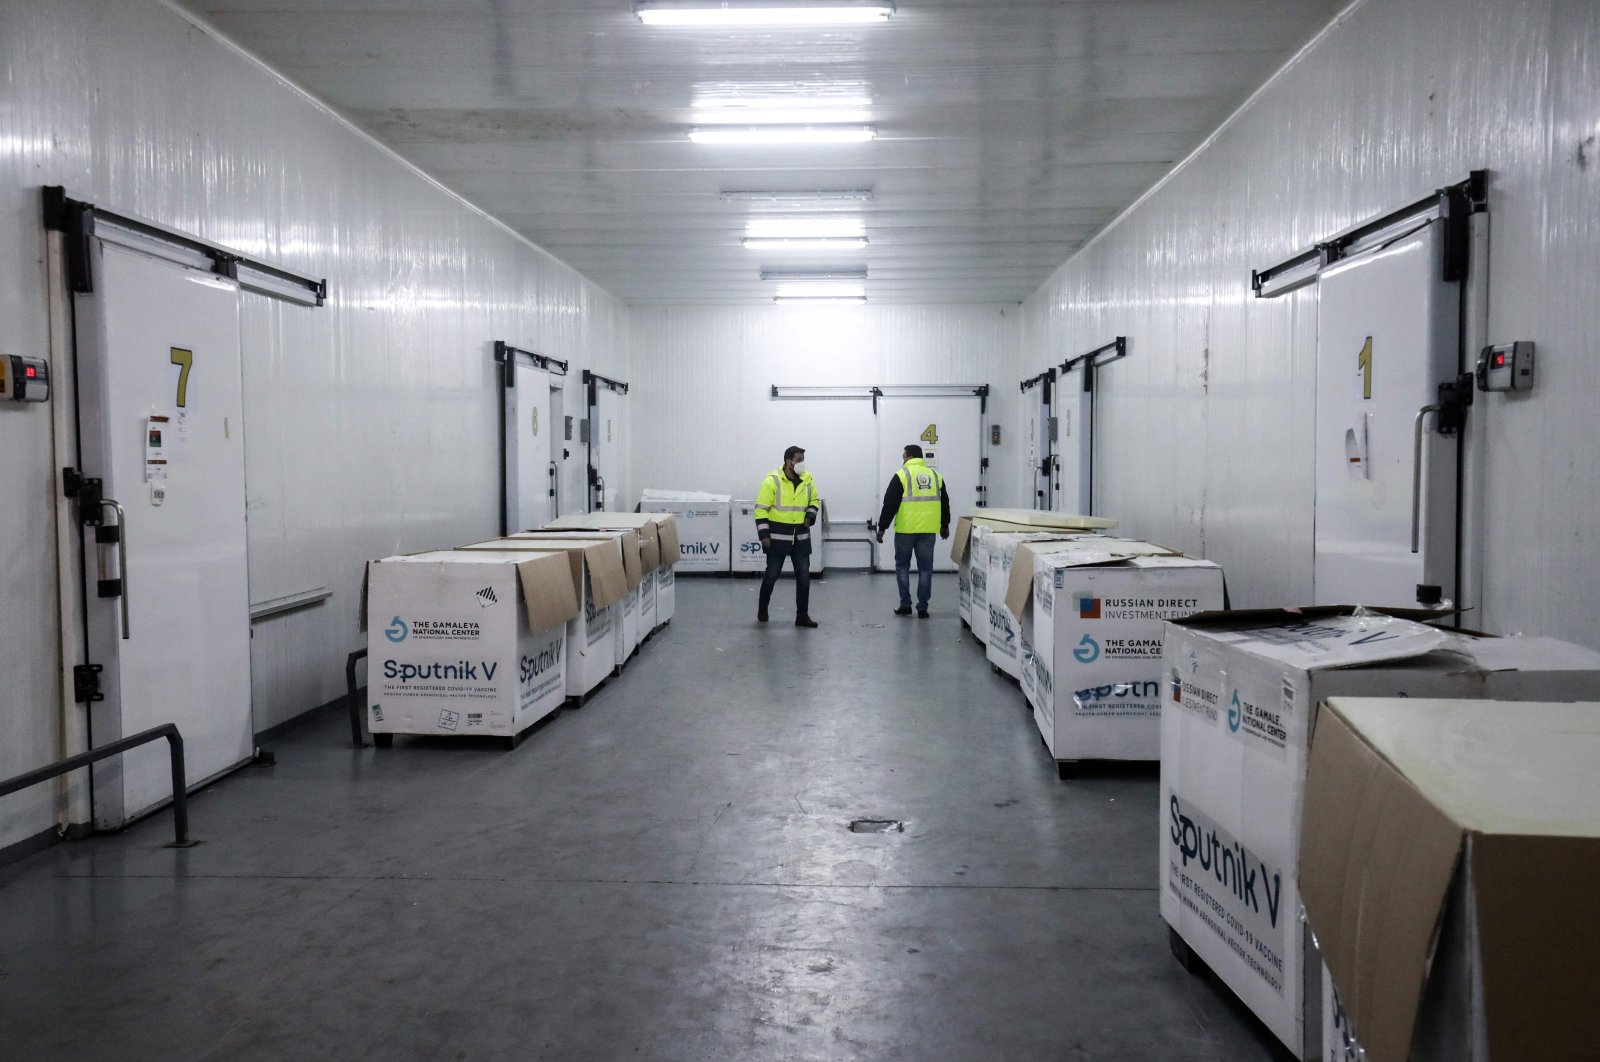 Workers handle boxes of the newly received first batch of the Russian Sputnik V vaccine against the coronavirus, before stockpiling them in refrigerated units inside the storage facilities of the Libyan health ministry, in the capital Tripoli, Libya, April 4, 2021. (AFP Photo)